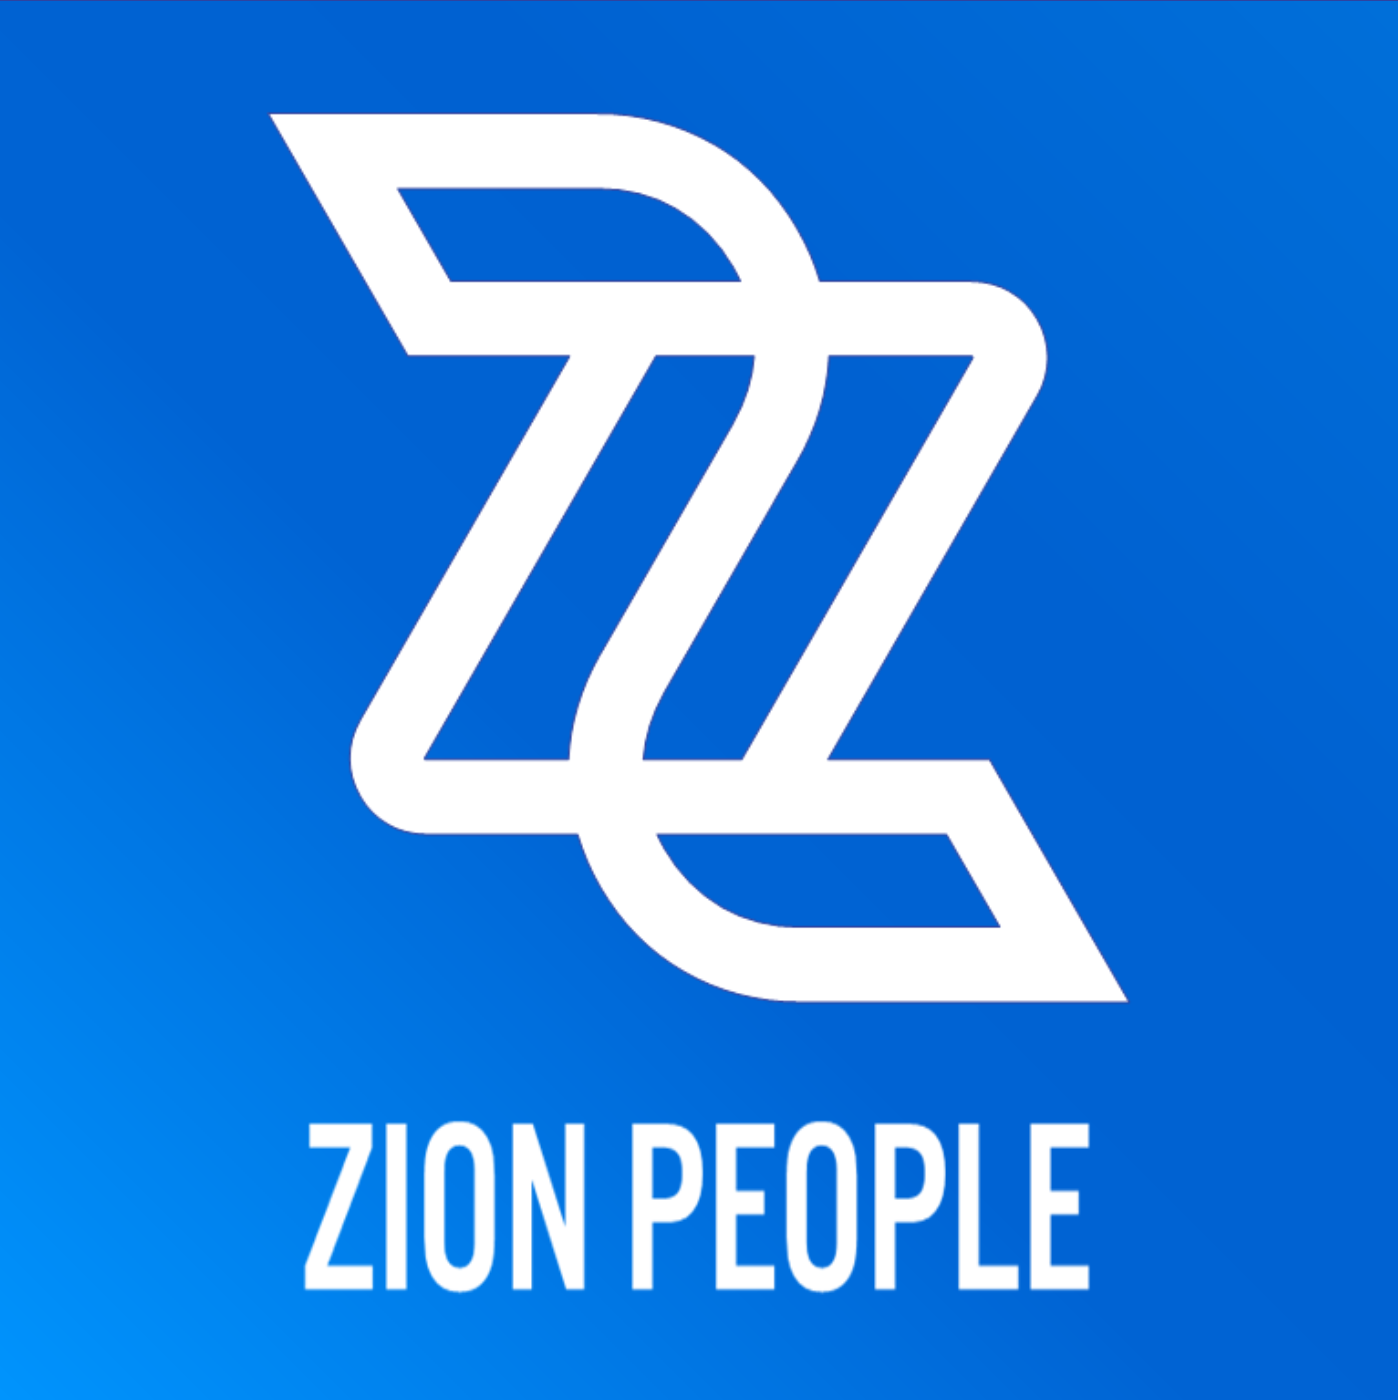 Zion People